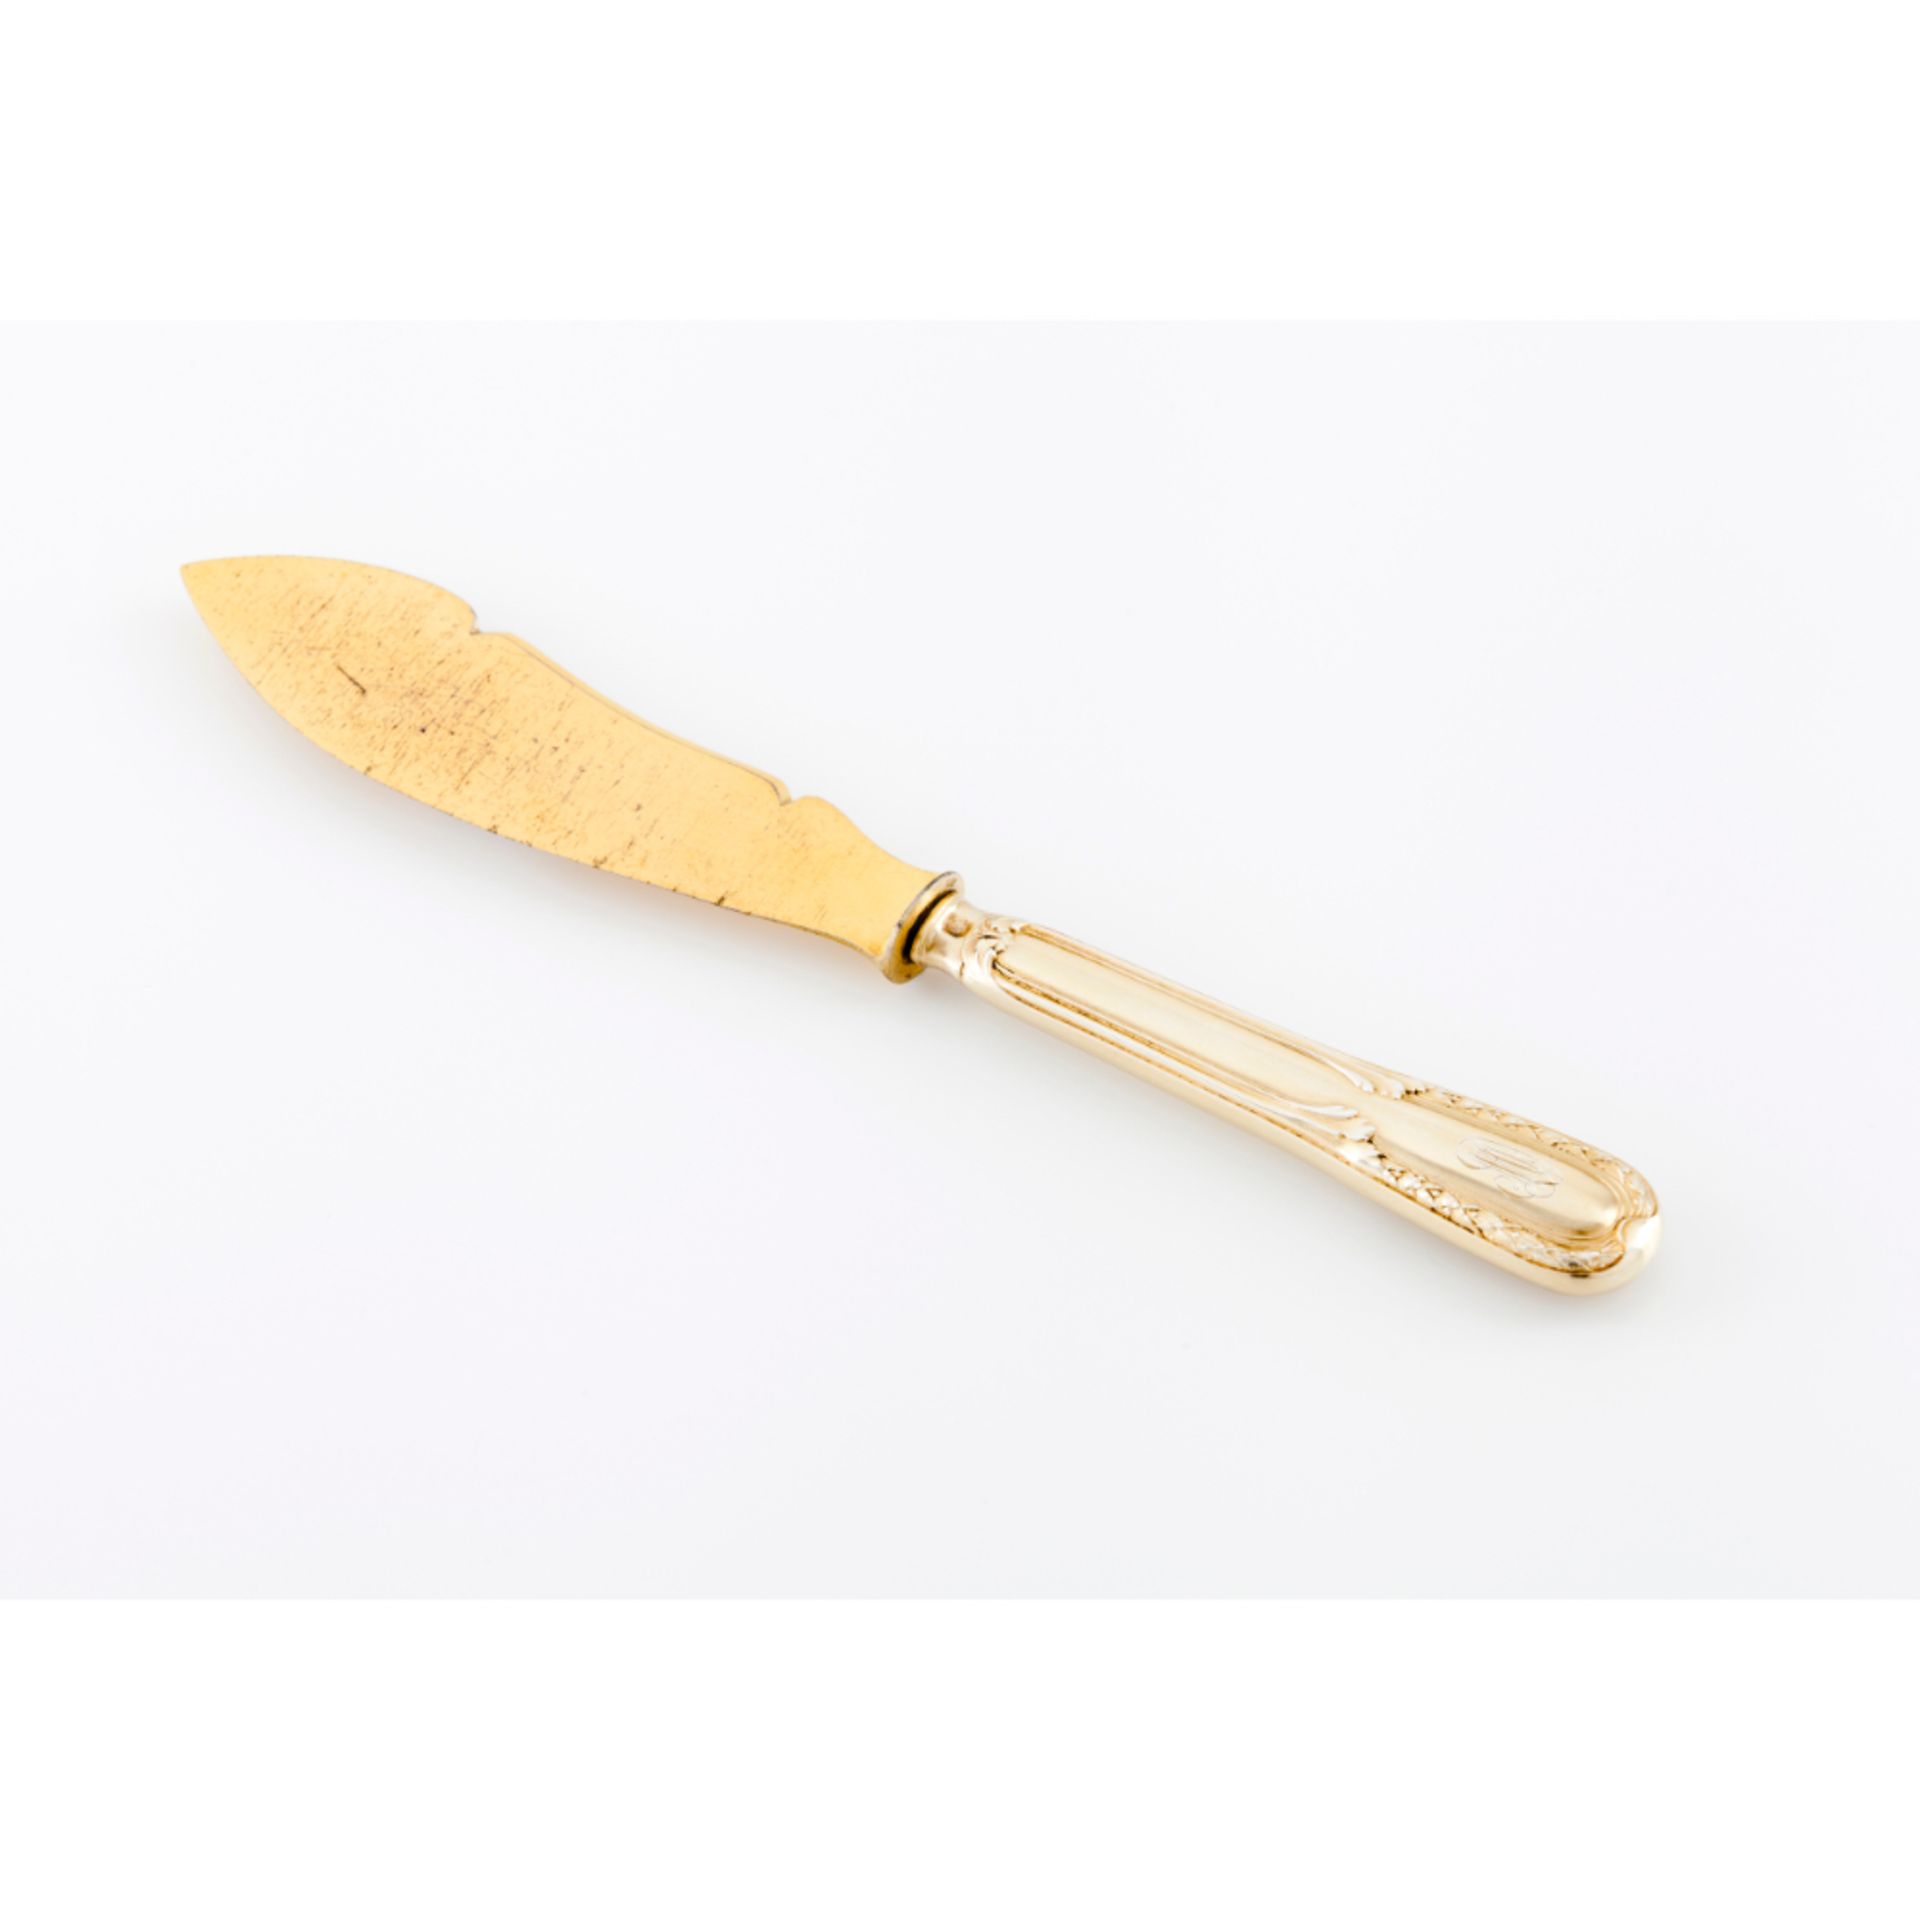 A Louis XVI style butter spreader